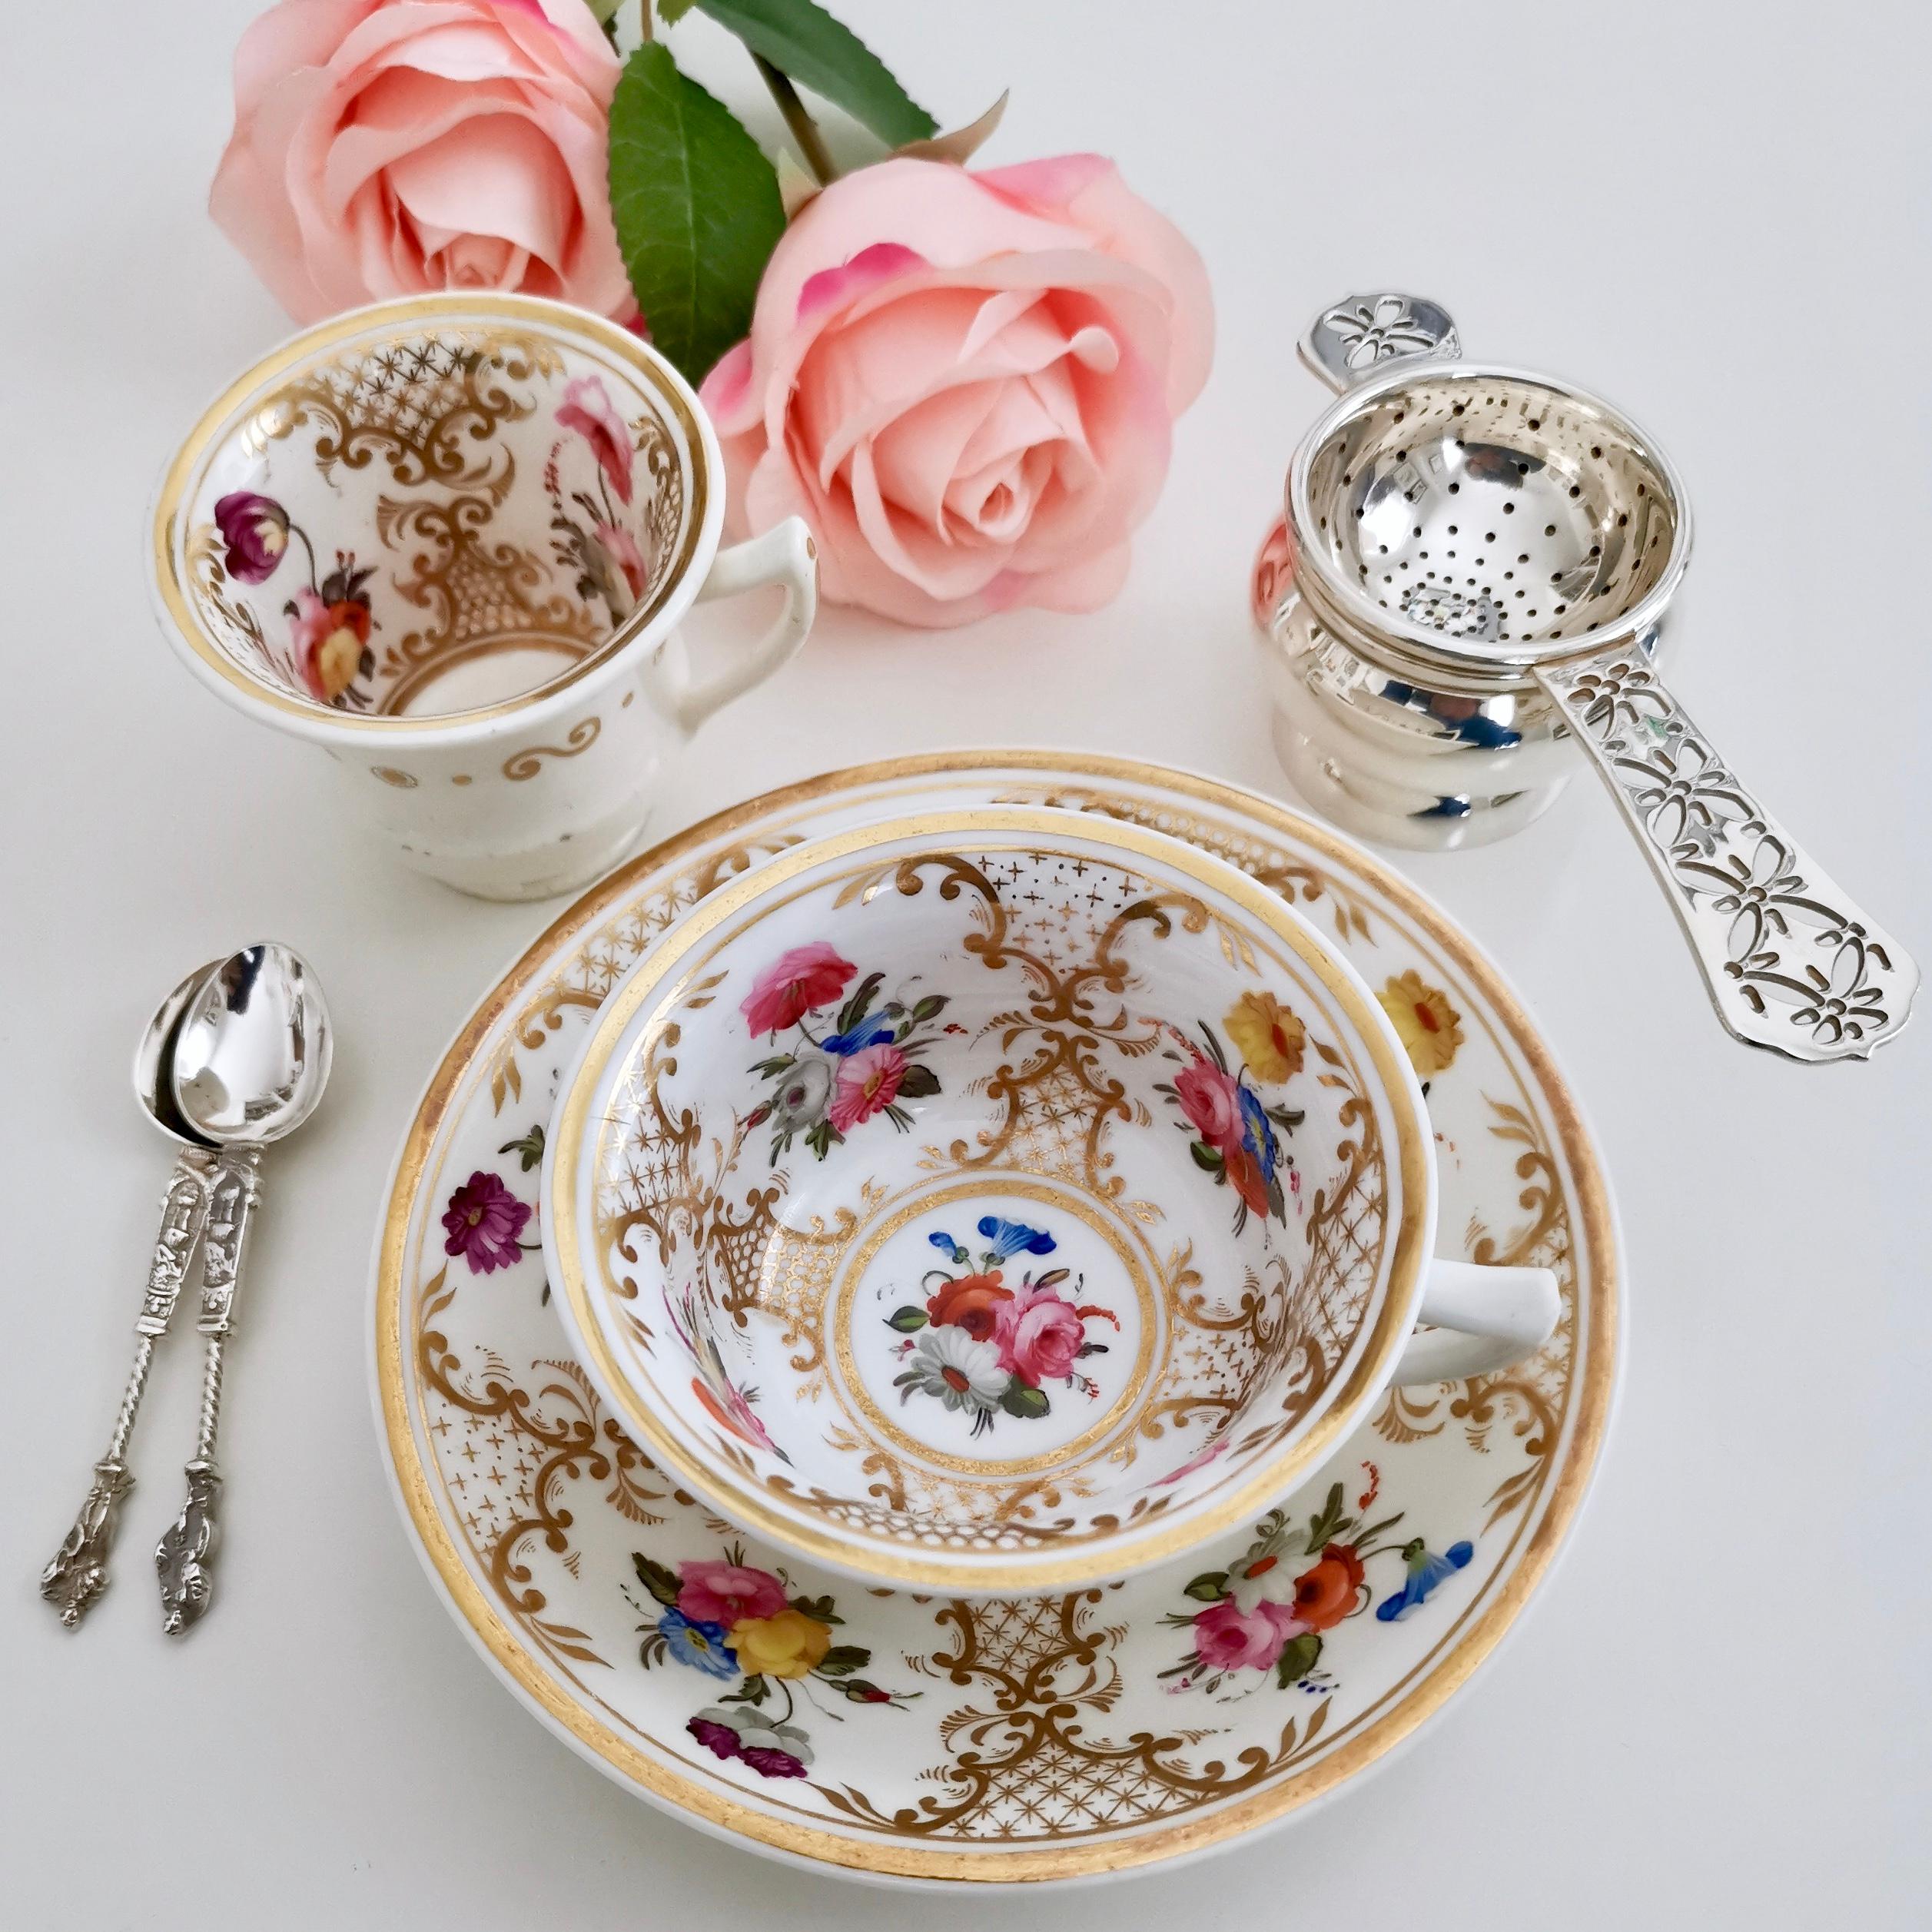 This is an exquisitely decorated trio made by Rathbone circa 1820. Tea and coffee cups were sold sharing one saucer in the early 19th century - as you wouldn't drink tea and coffee at the same time, why would you invest in an extra saucer?

This